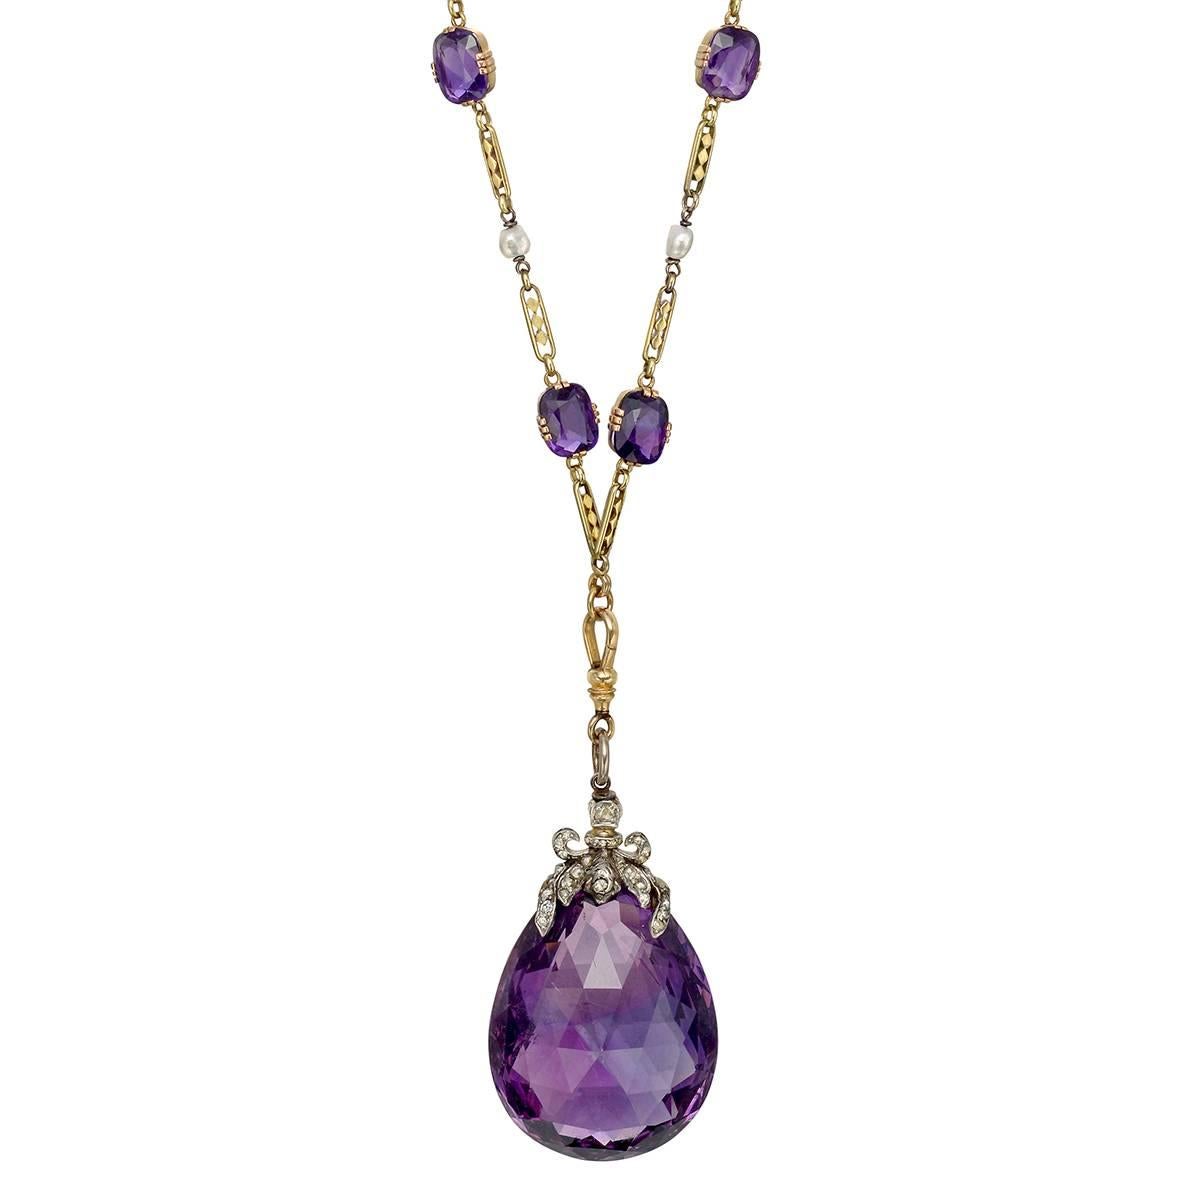 Antique Russian long necklace, showcasing a large pear-shaped faceted amethyst pendant drop with a rose-cut diamond bow and foliate motif top, suspended from a cushion-shaped amethyst and baroque pearl fancy-link chain necklace, in 14k gold, circa